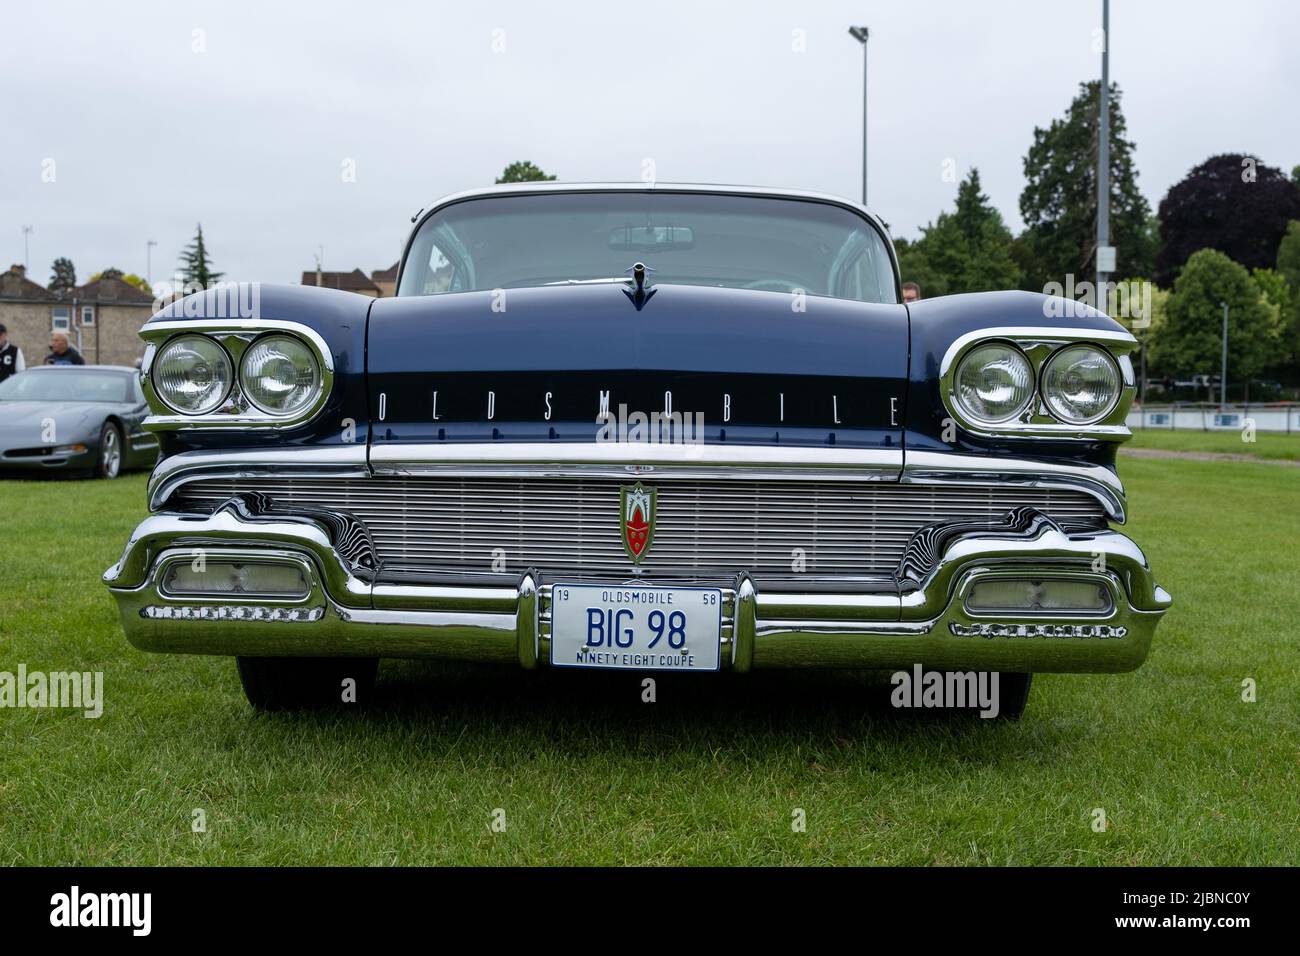 1958 Oldsmobile Ninety Eight Coupe at the American Classic Car Show at Keynsham rugby club (Jun22) Stock Photo